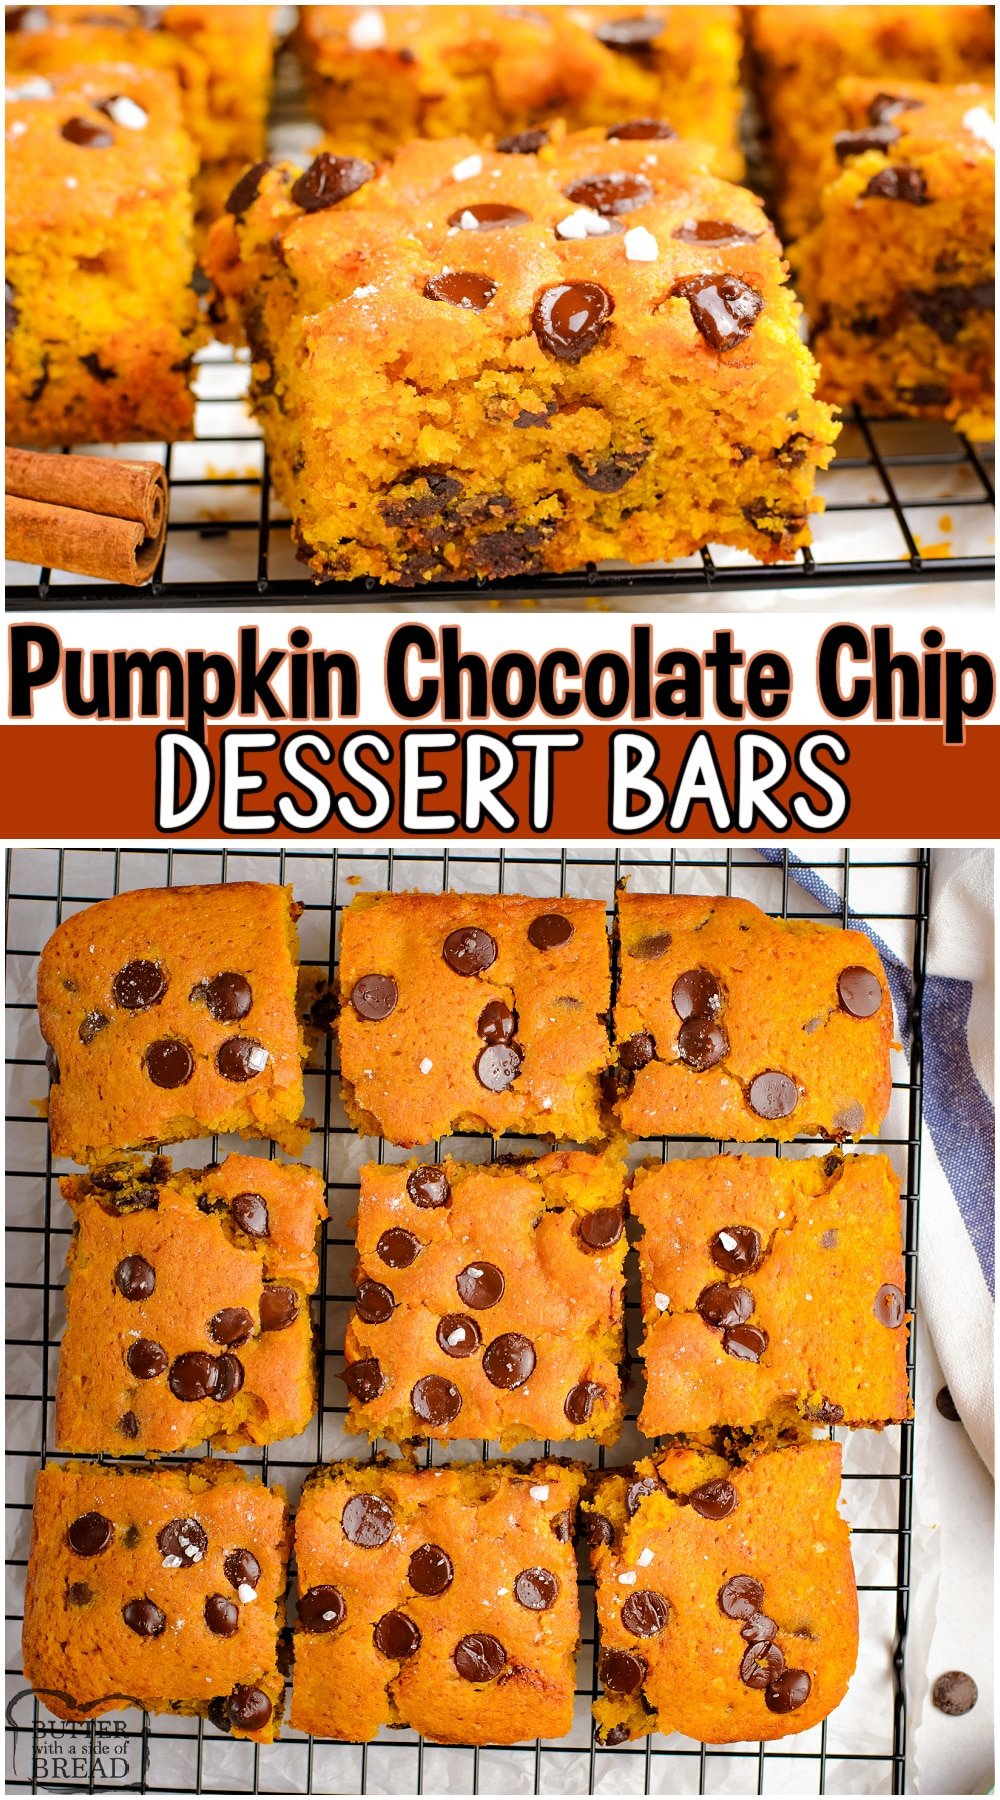 Pumpkin Chocolate Chip Bars made with pumpkin puree, brown sugar, brown butter & a warm blend of Fall spices! Pumpkin dessert bars loaded with chocolate chips & sprinkled with sea salt for the perfect finishing touch! #pumpkin #chocolatechip #baking #Fall #brownbutter #easyrecipe from BUTTER WITH A SIDE OF BREAD